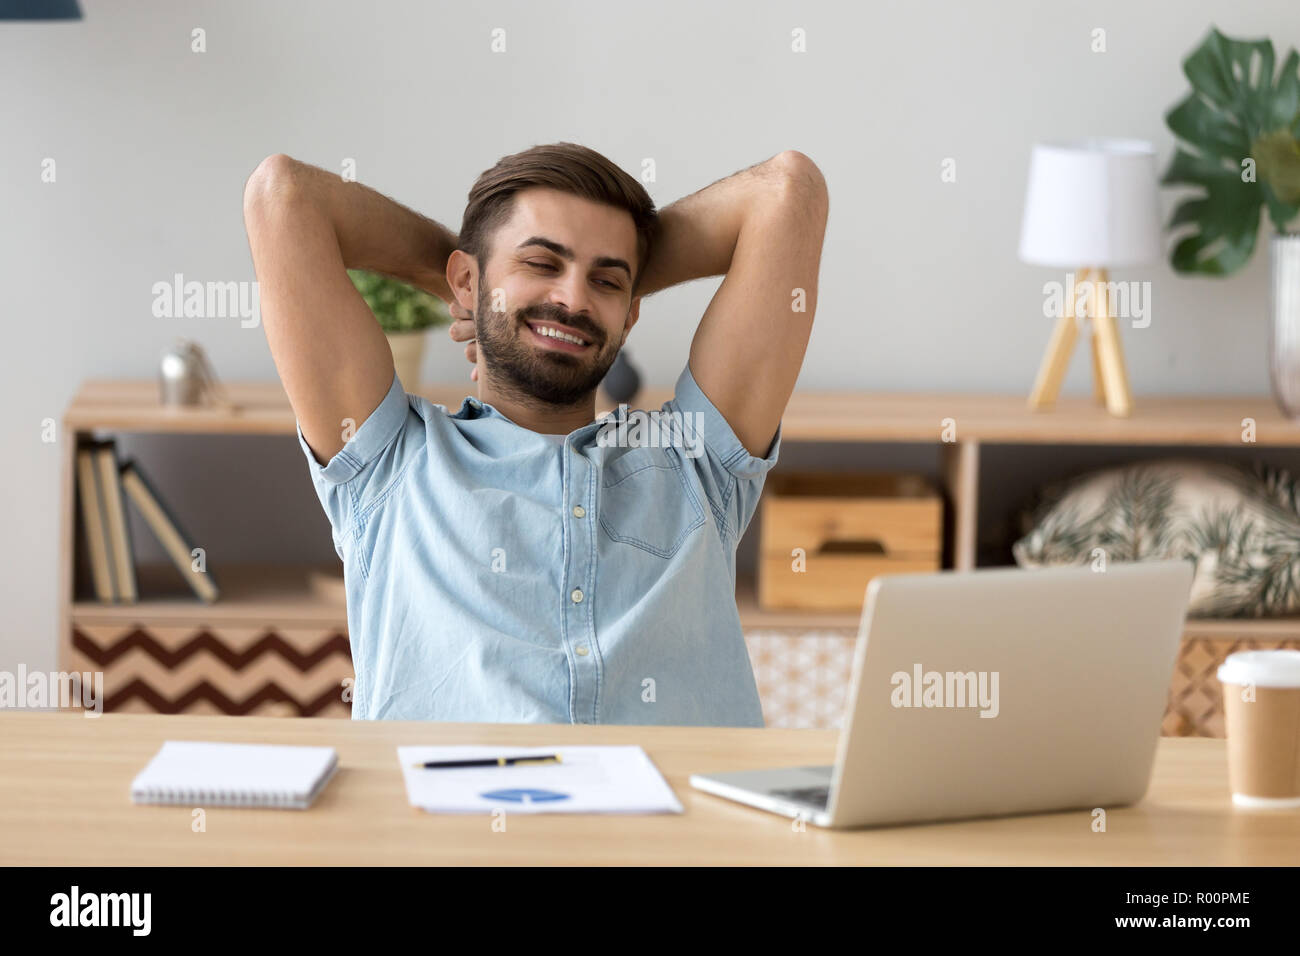 Relaxed man sitting holding hands behind head indoors Stock Photo